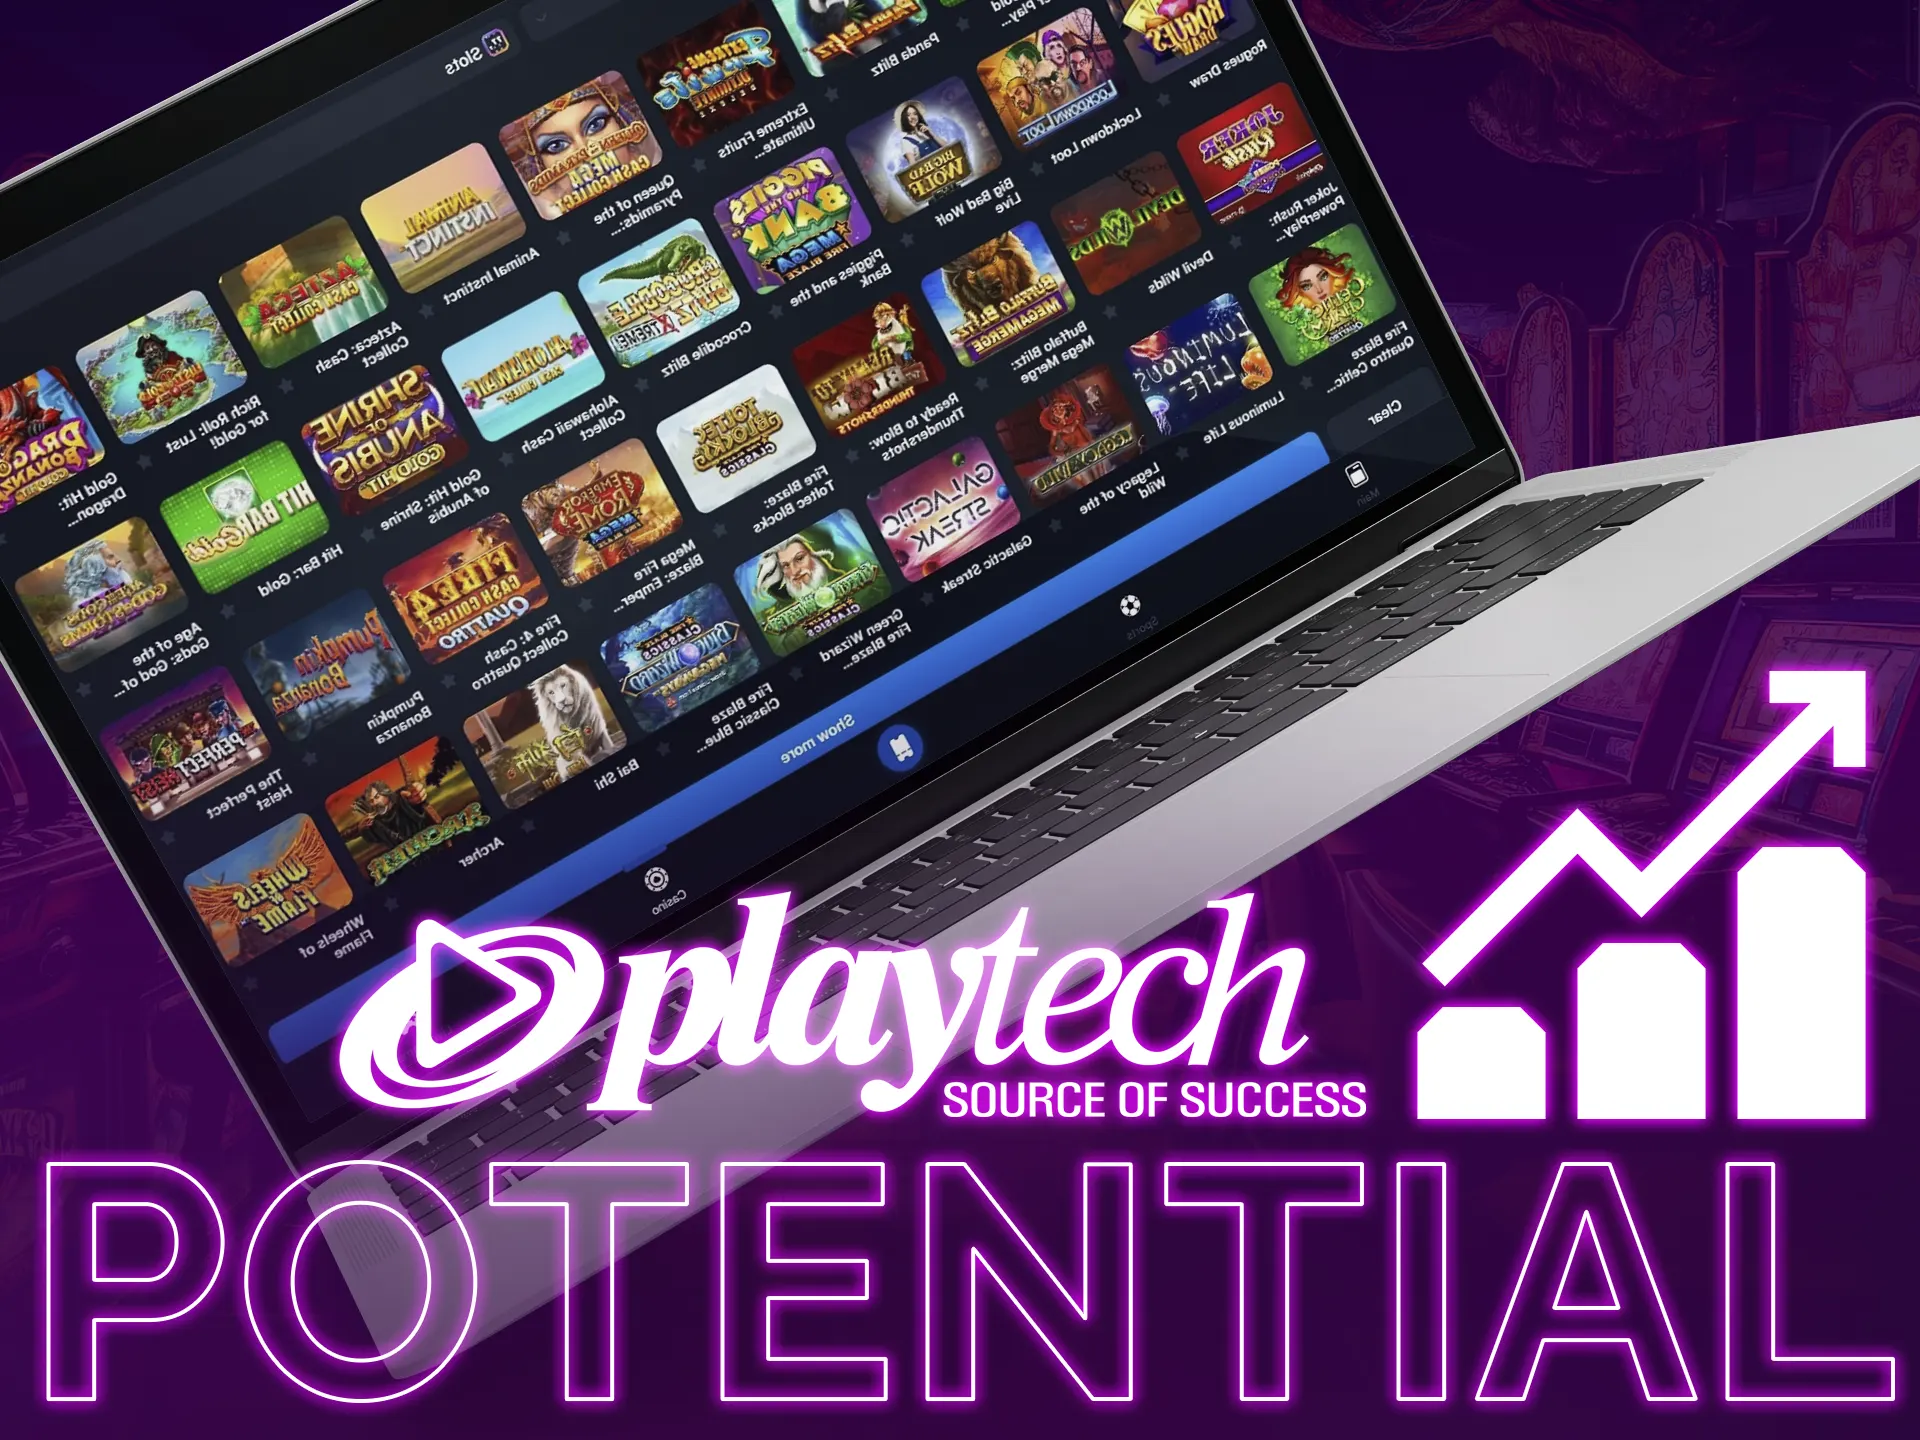 Playtech Potential indicates the assured size of your potential winnings.